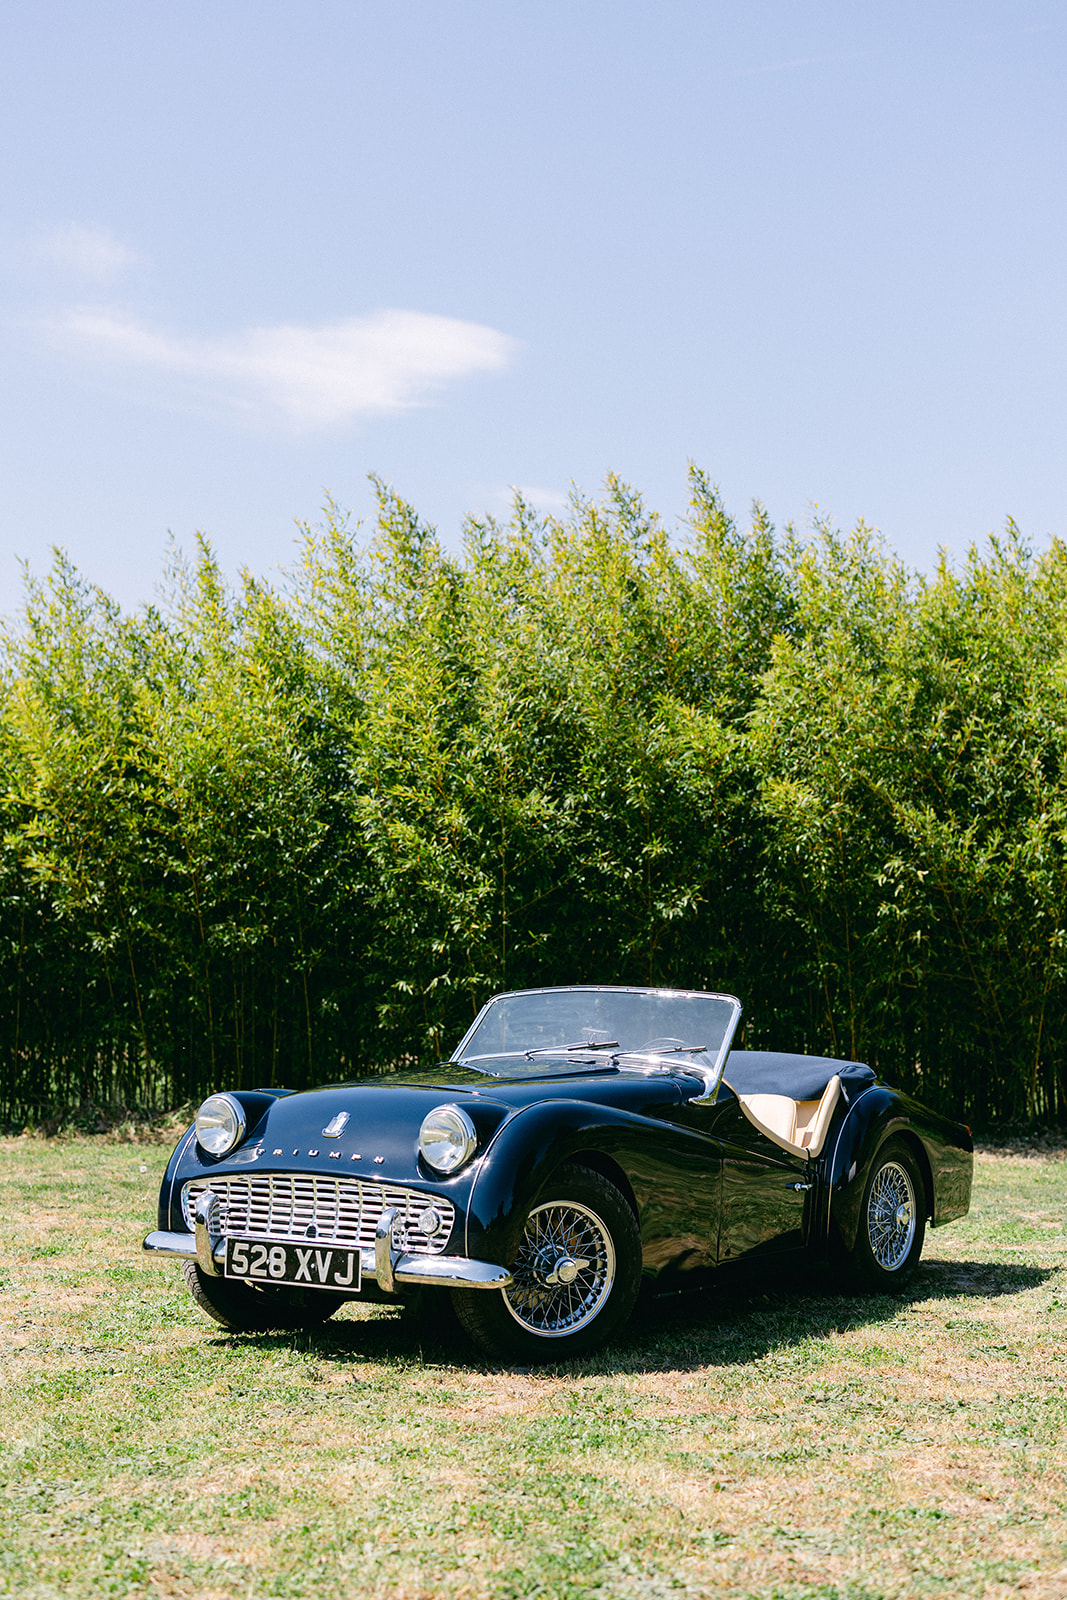 A photopraph of one of the vehicles available for touring at Provence Classics.